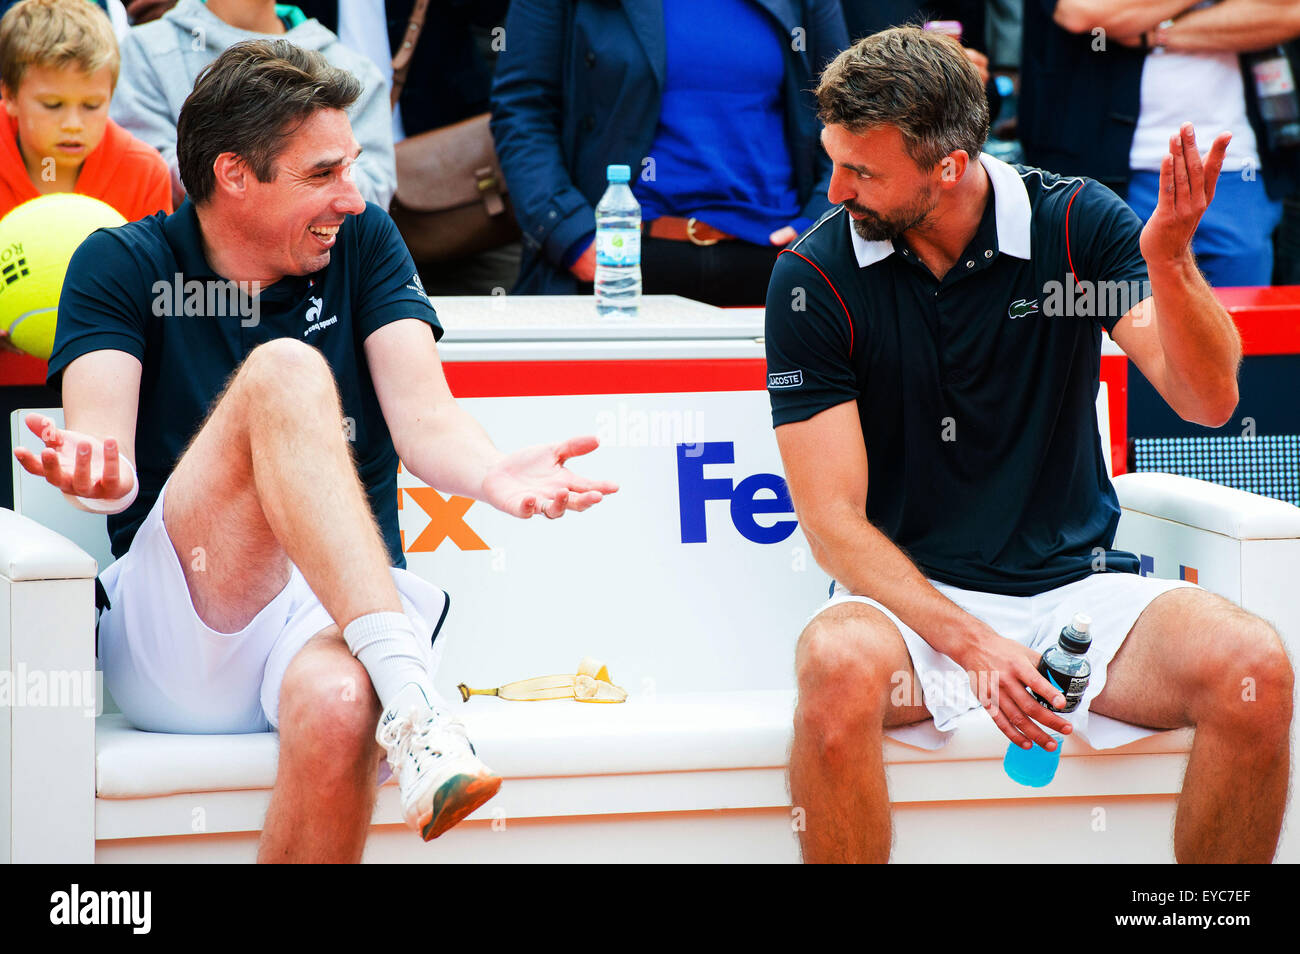 Former tennis pros Michael Stich (L) of Germany and Goran Ivanisevic of  Croatia talk to each other during the Tennis Legenden-Match (lit. Match of  the tennis legends) event in Hamburg, Germany, 26